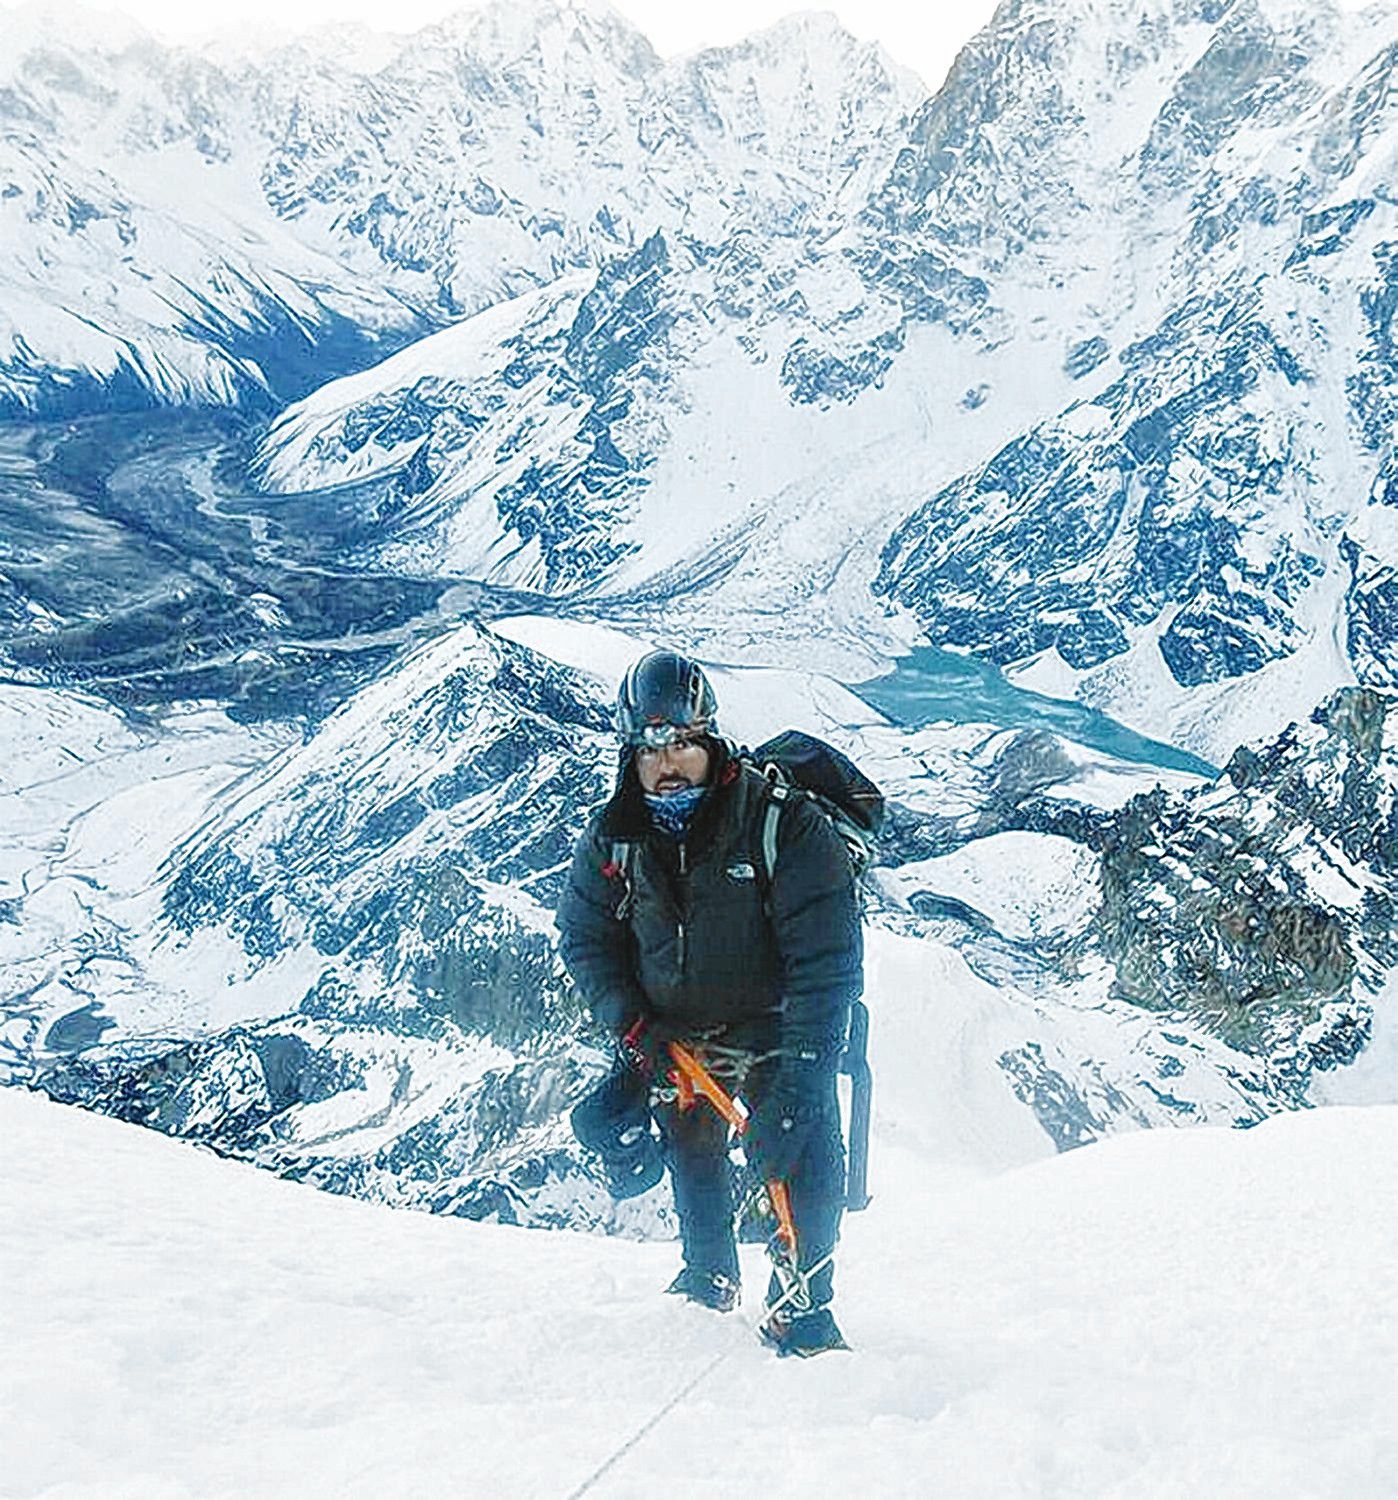 NHTI's Wings of Knowledge to feature Everest climber Jake St. Pierre ...